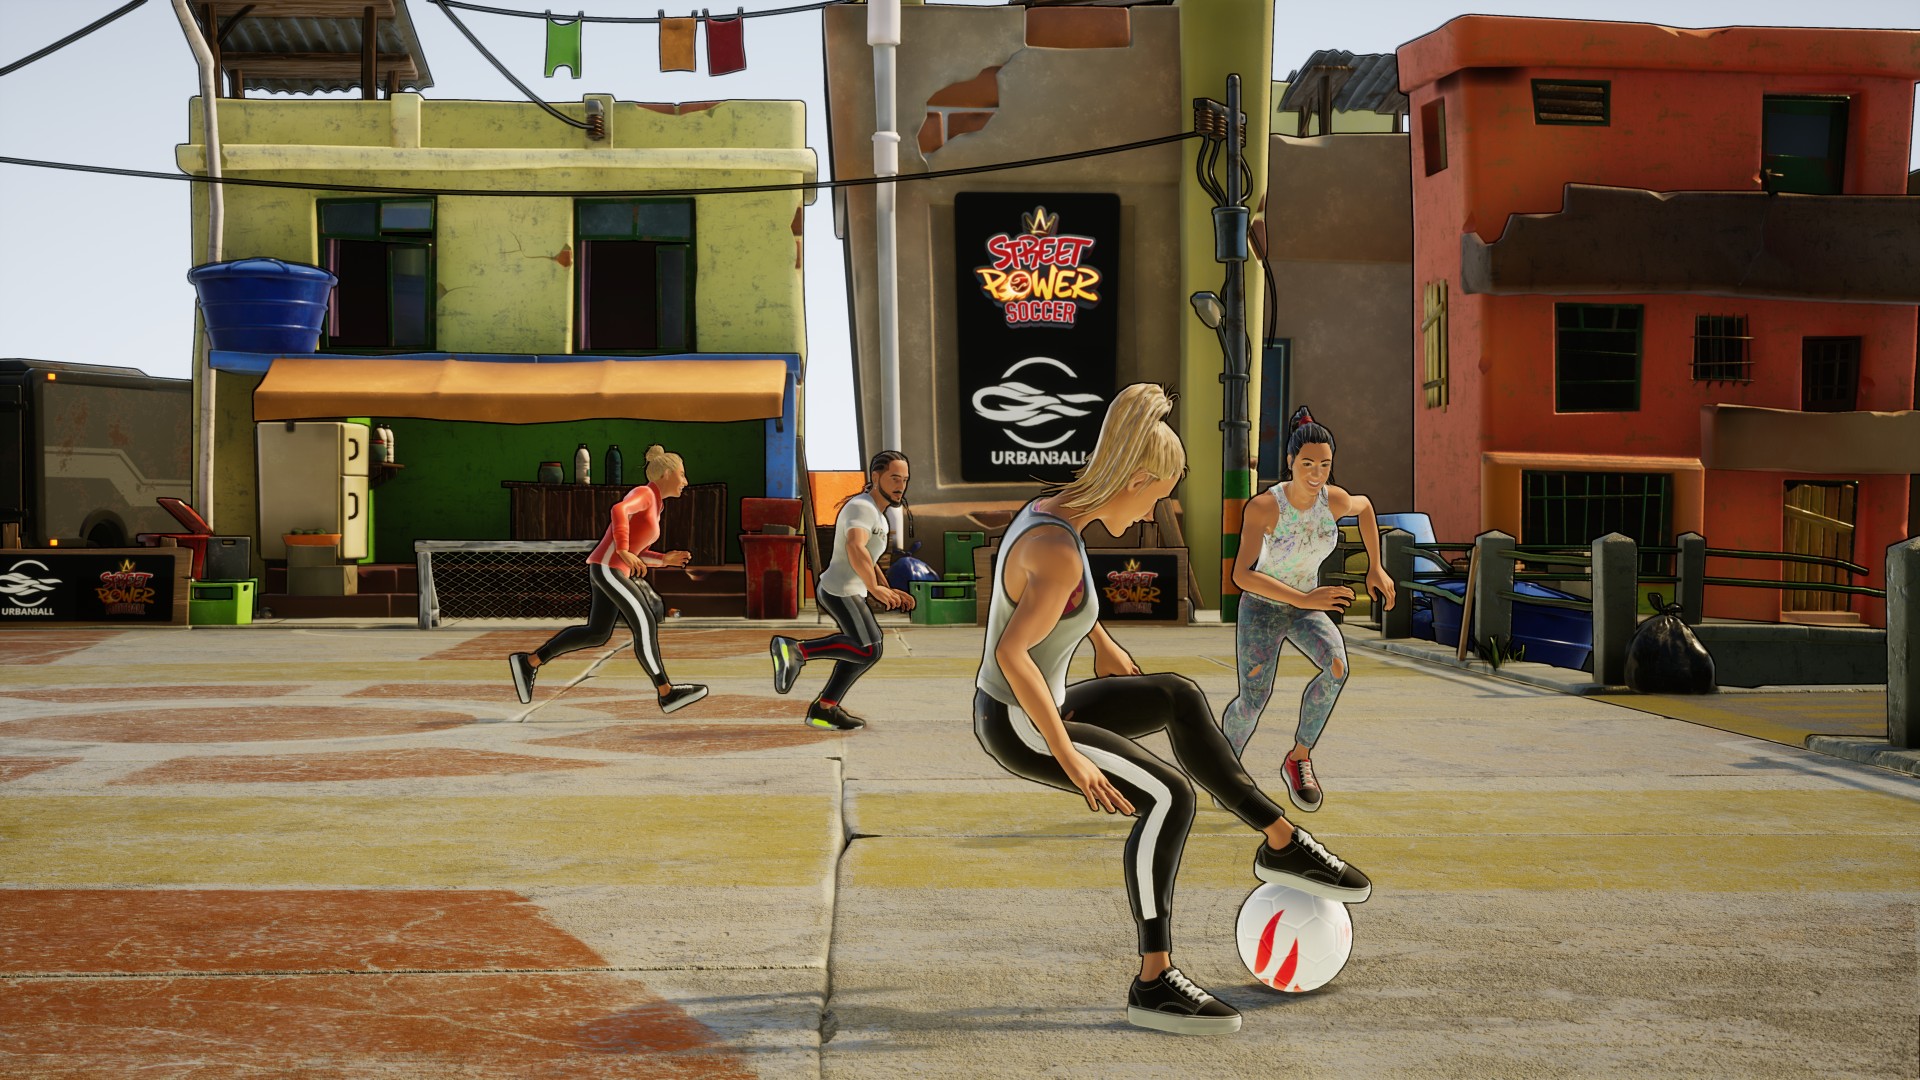 Street Power Soccer Is Bringing Over The Top Style And Arcade Action To Xbox One This Year Xbox Wire - game xbox one super striker game xbox one roblox